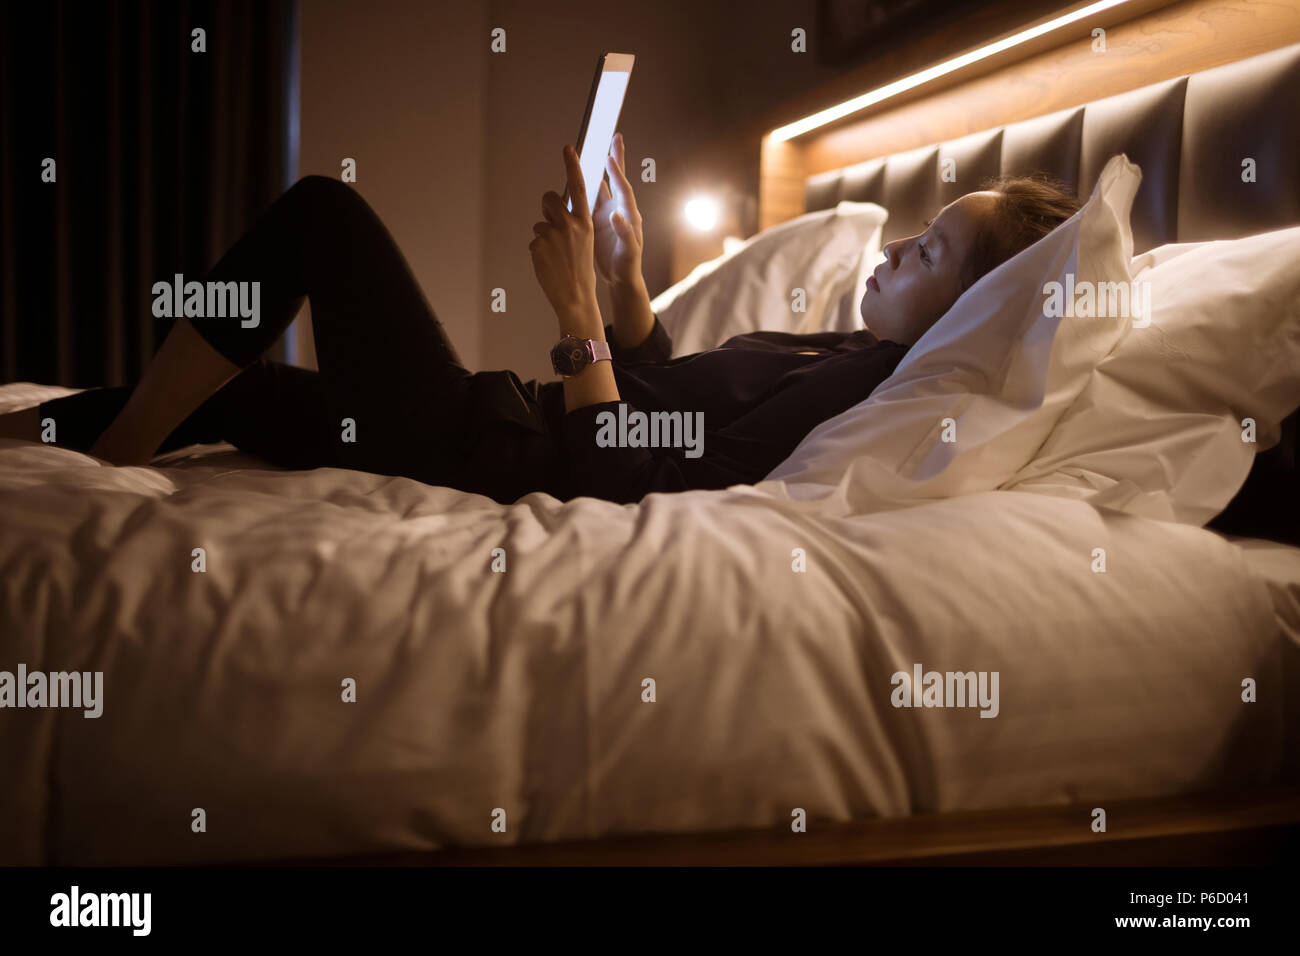 Woman using digital tablet while relaxing on bed Banque D'Images